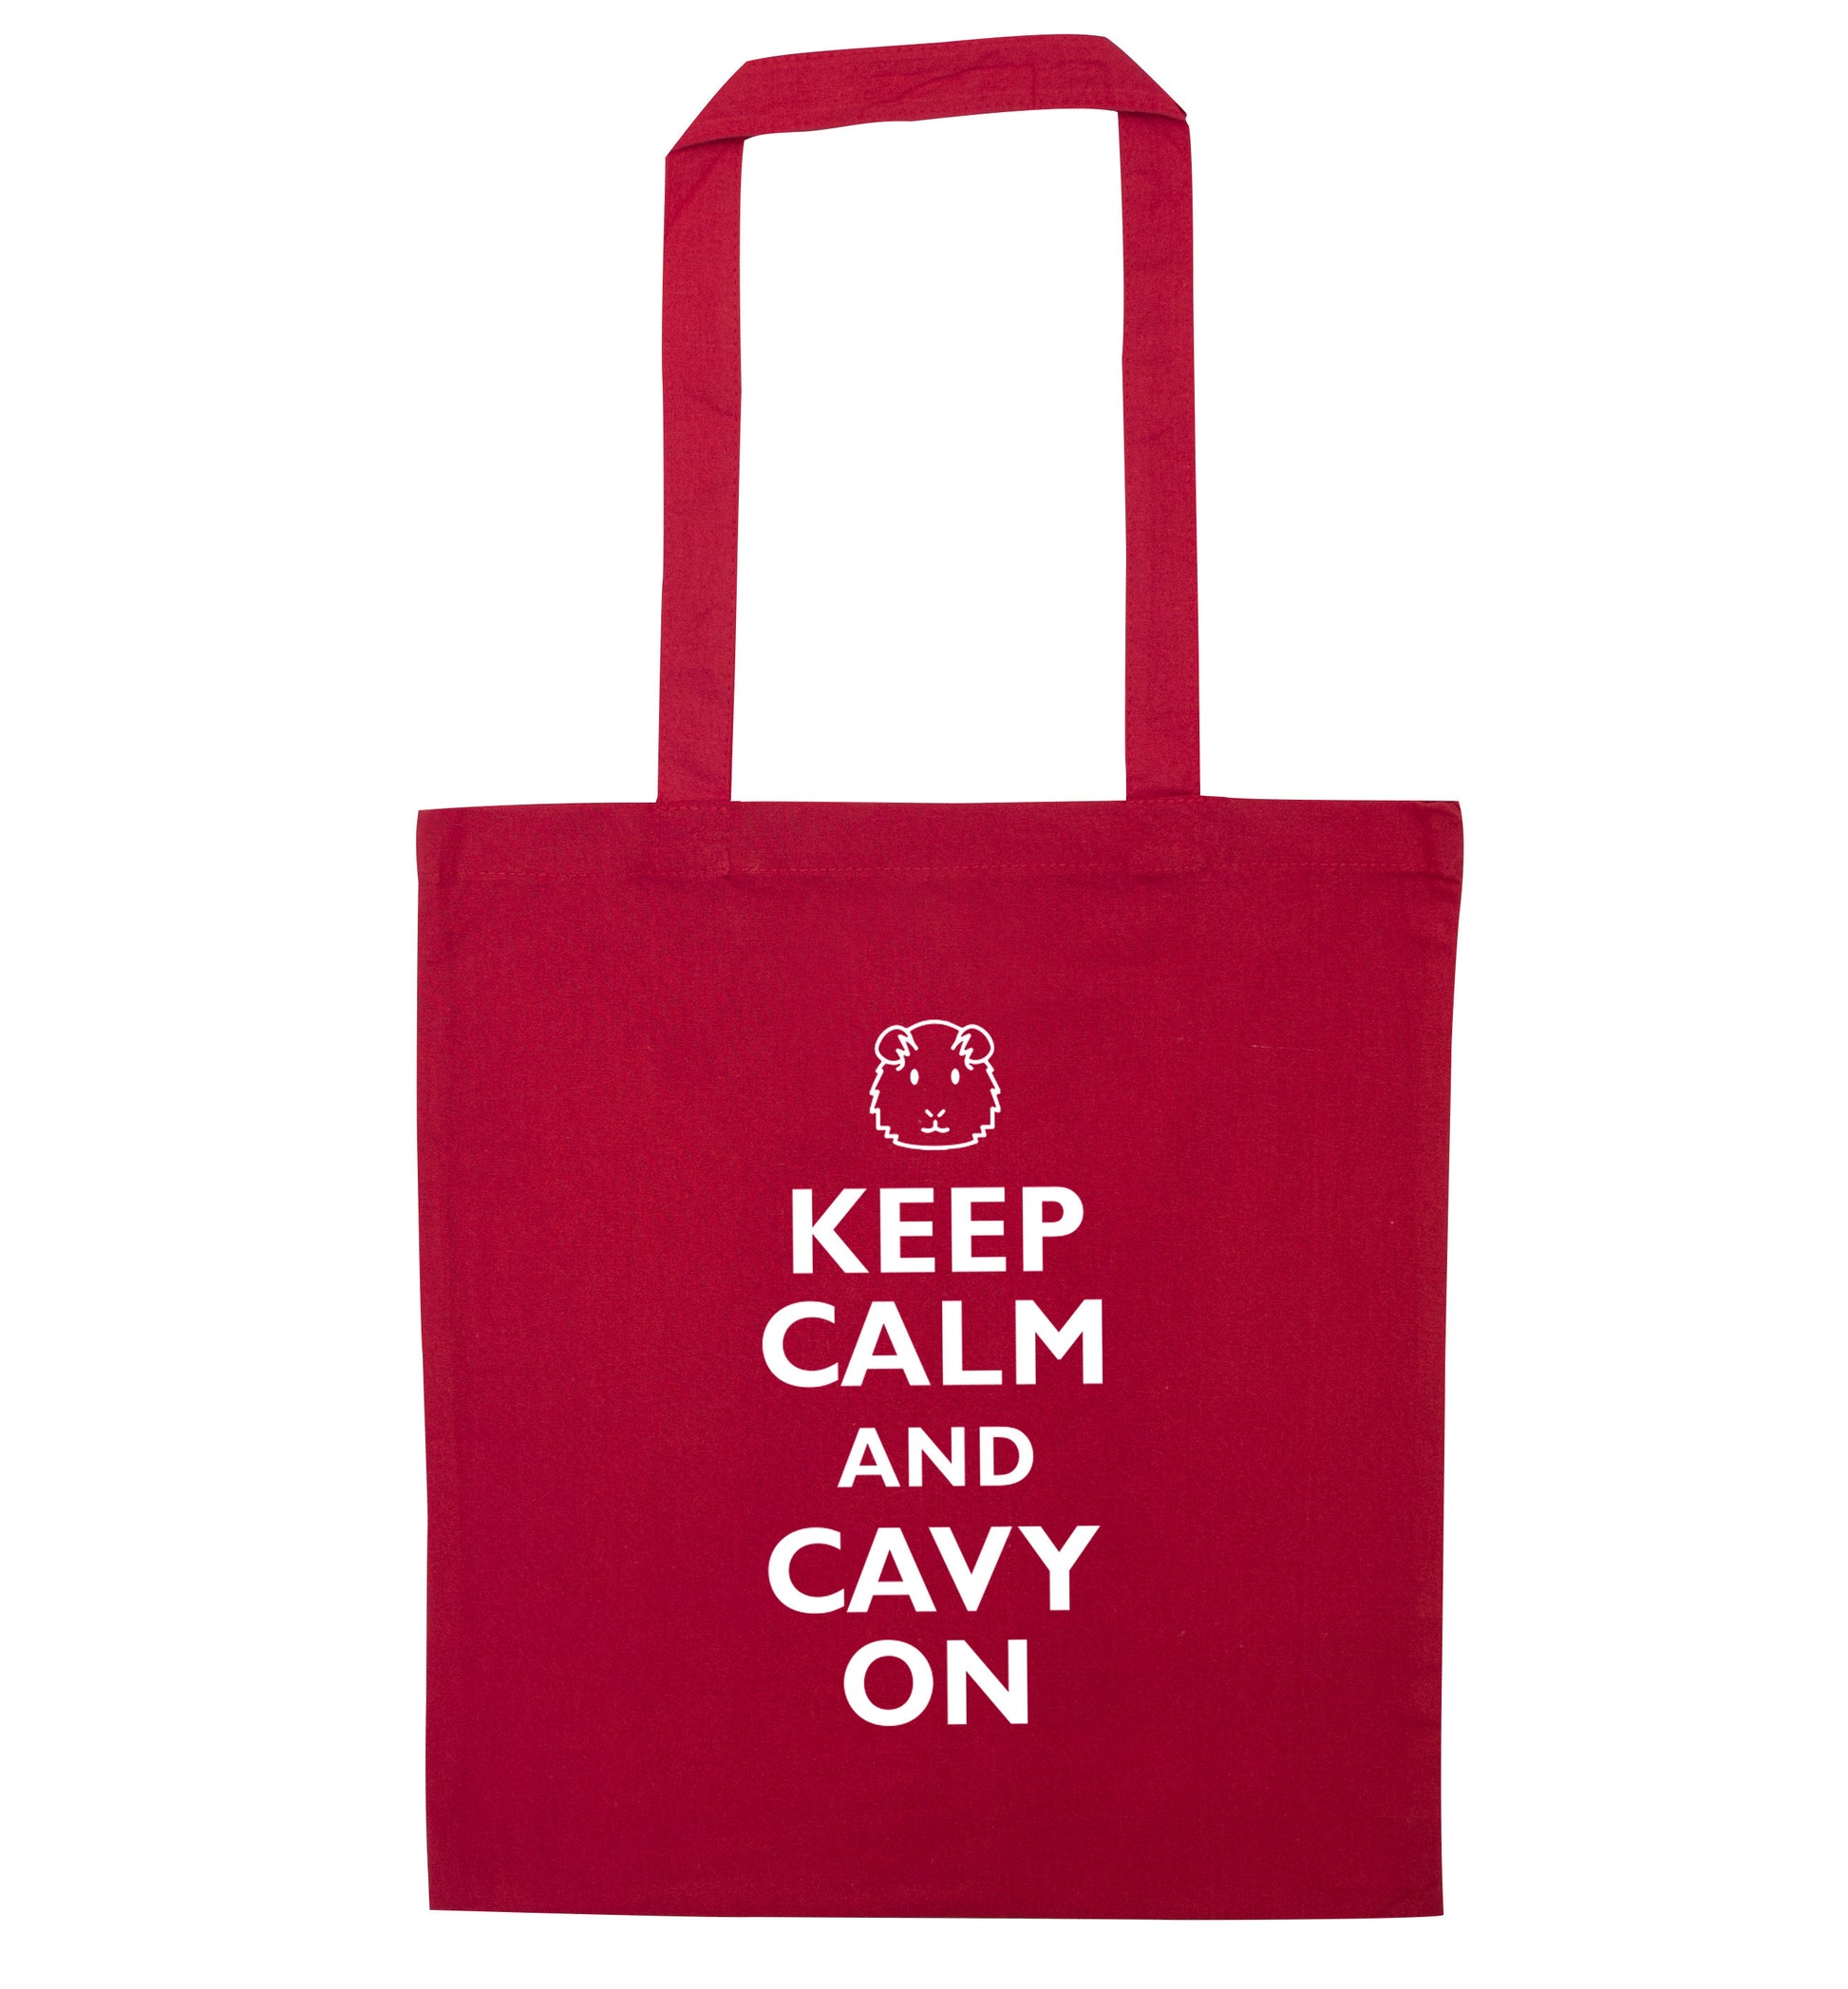 Keep calm and cavvy on red tote bag